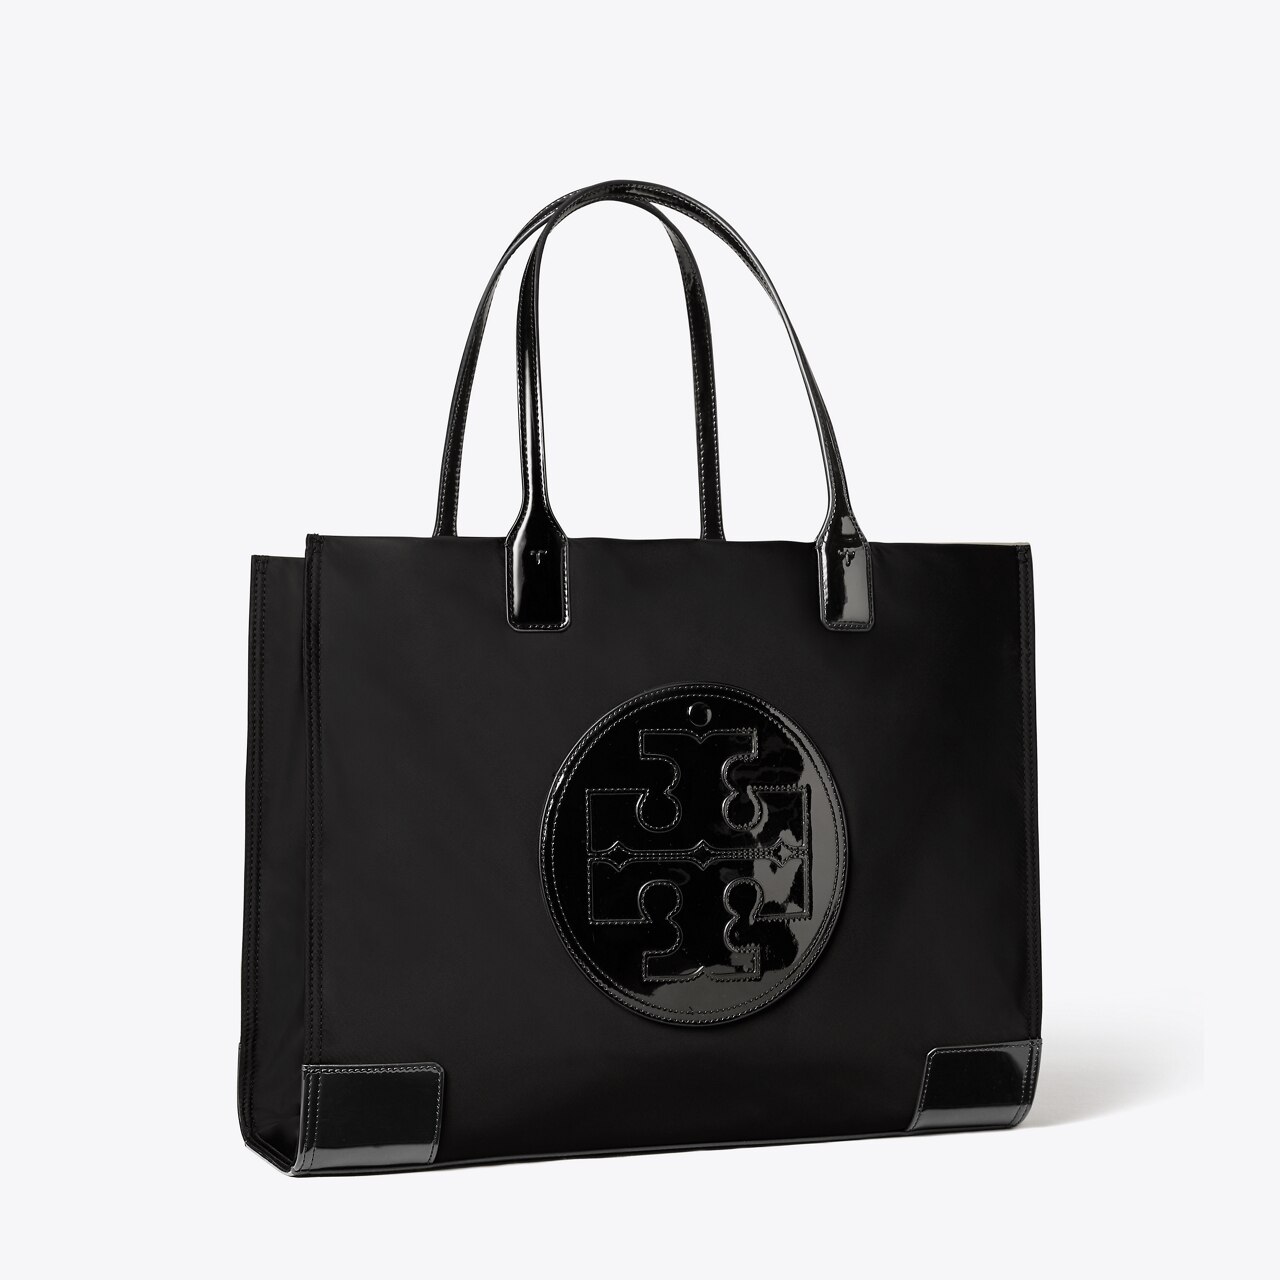 Tory Burch Large Tote Bag Black Leather